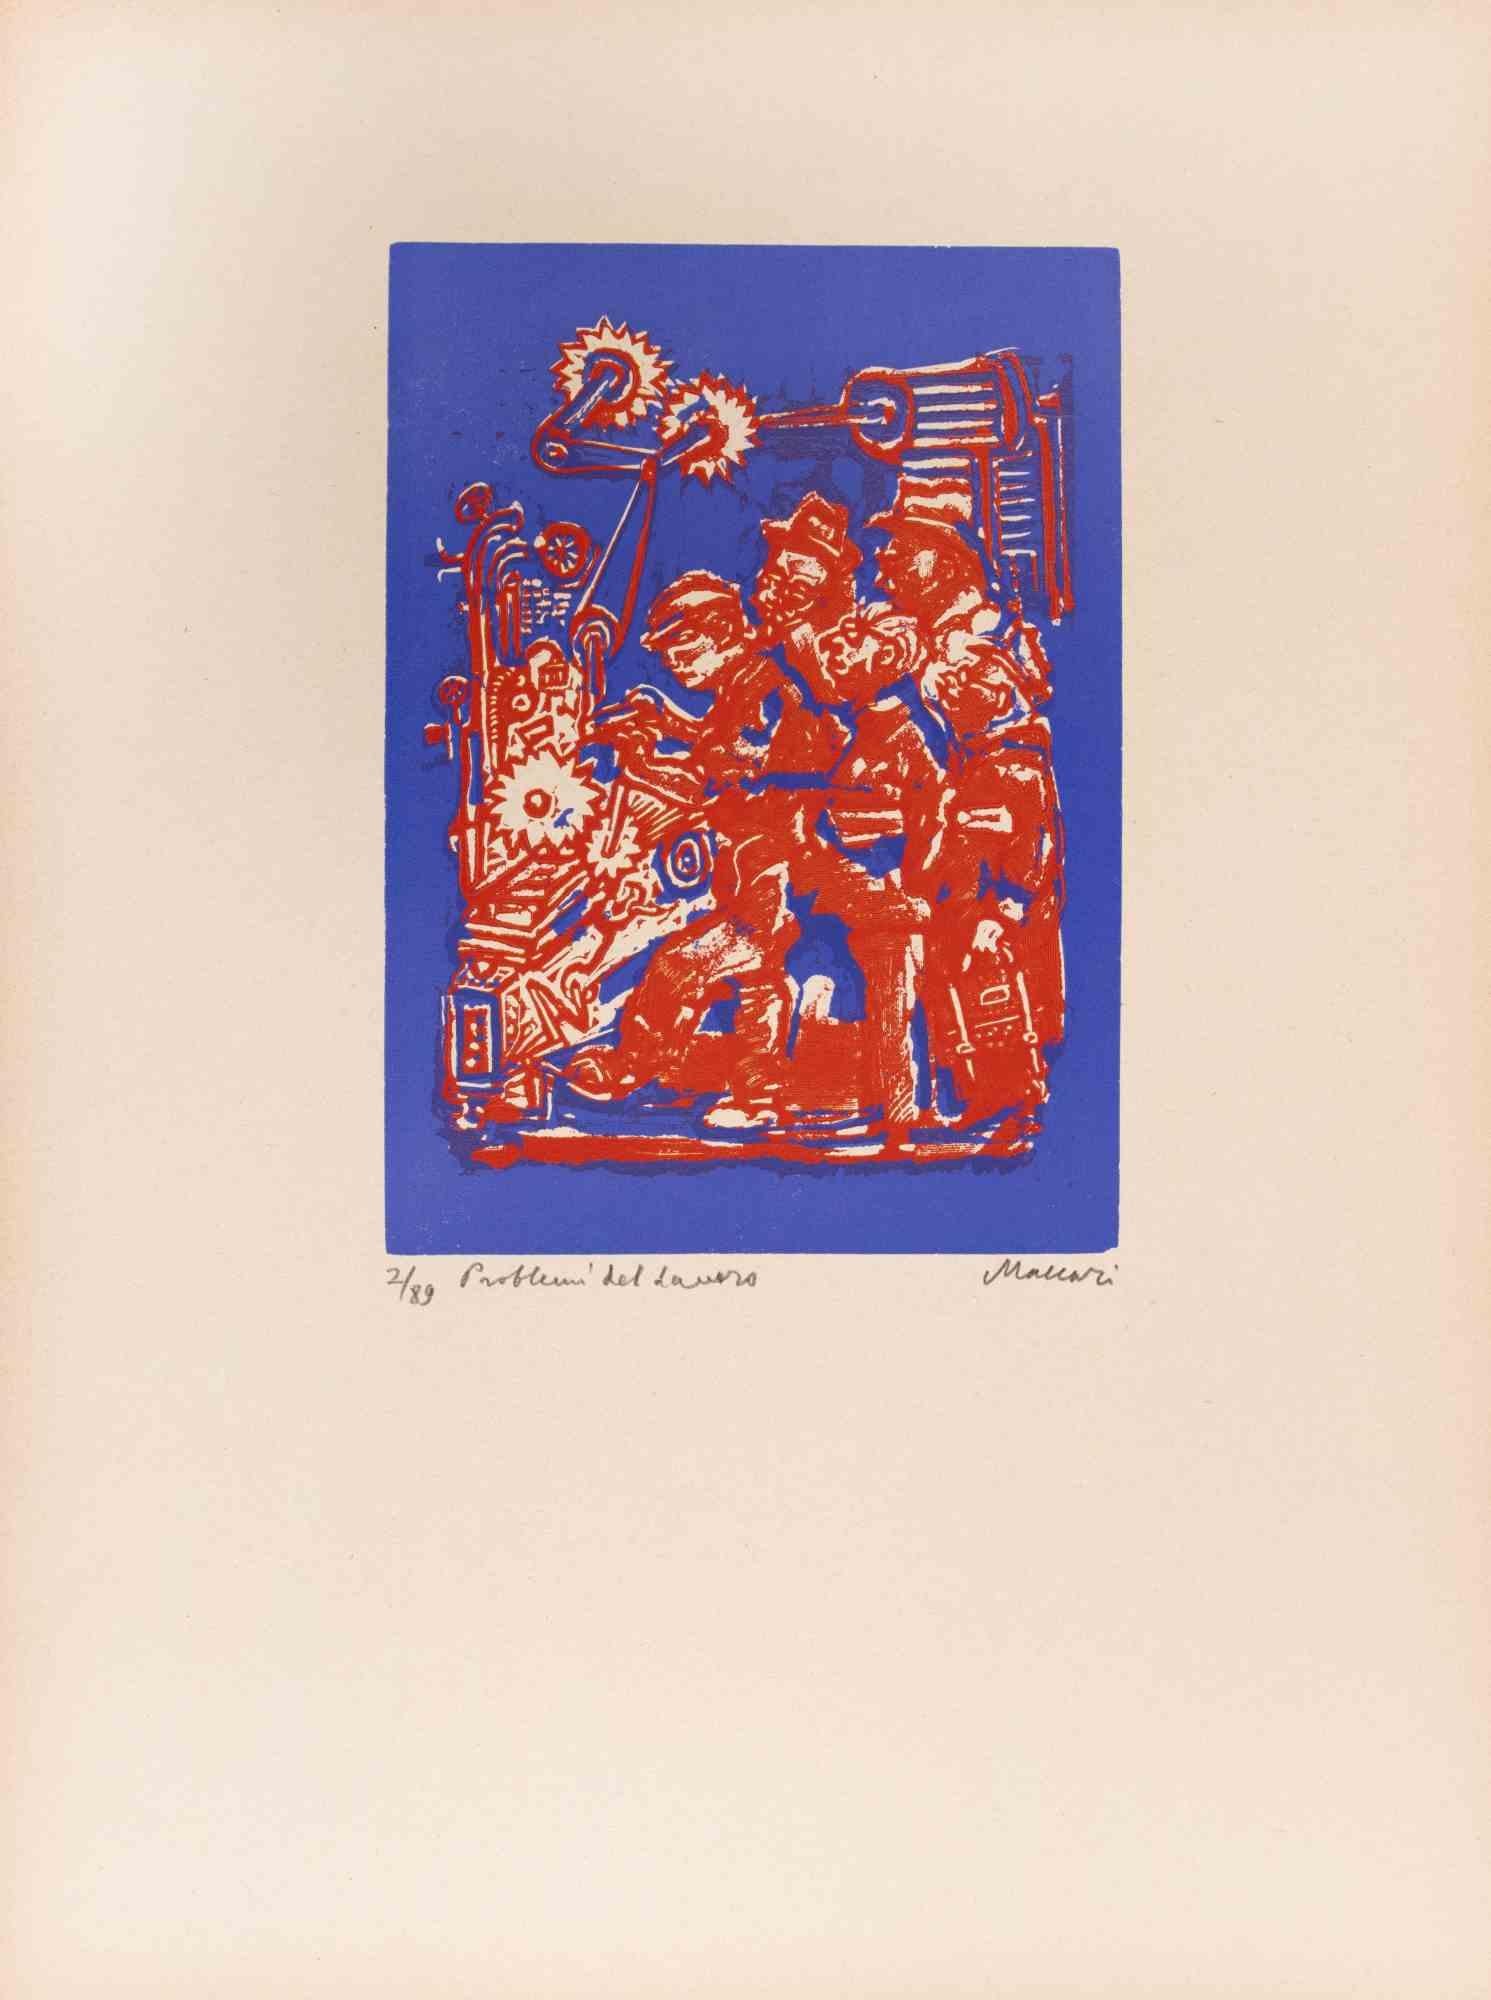 Work problems is an Artwork realized by Mino Maccari  (1924-1989) in the Mid-20th Century.

Colored woodcut on paper. Hand-signed on the lower, numbered 2/89 specimens and titled on the left margin.

Good conditions.

Mino Maccari (Siena, 1924-Rome,